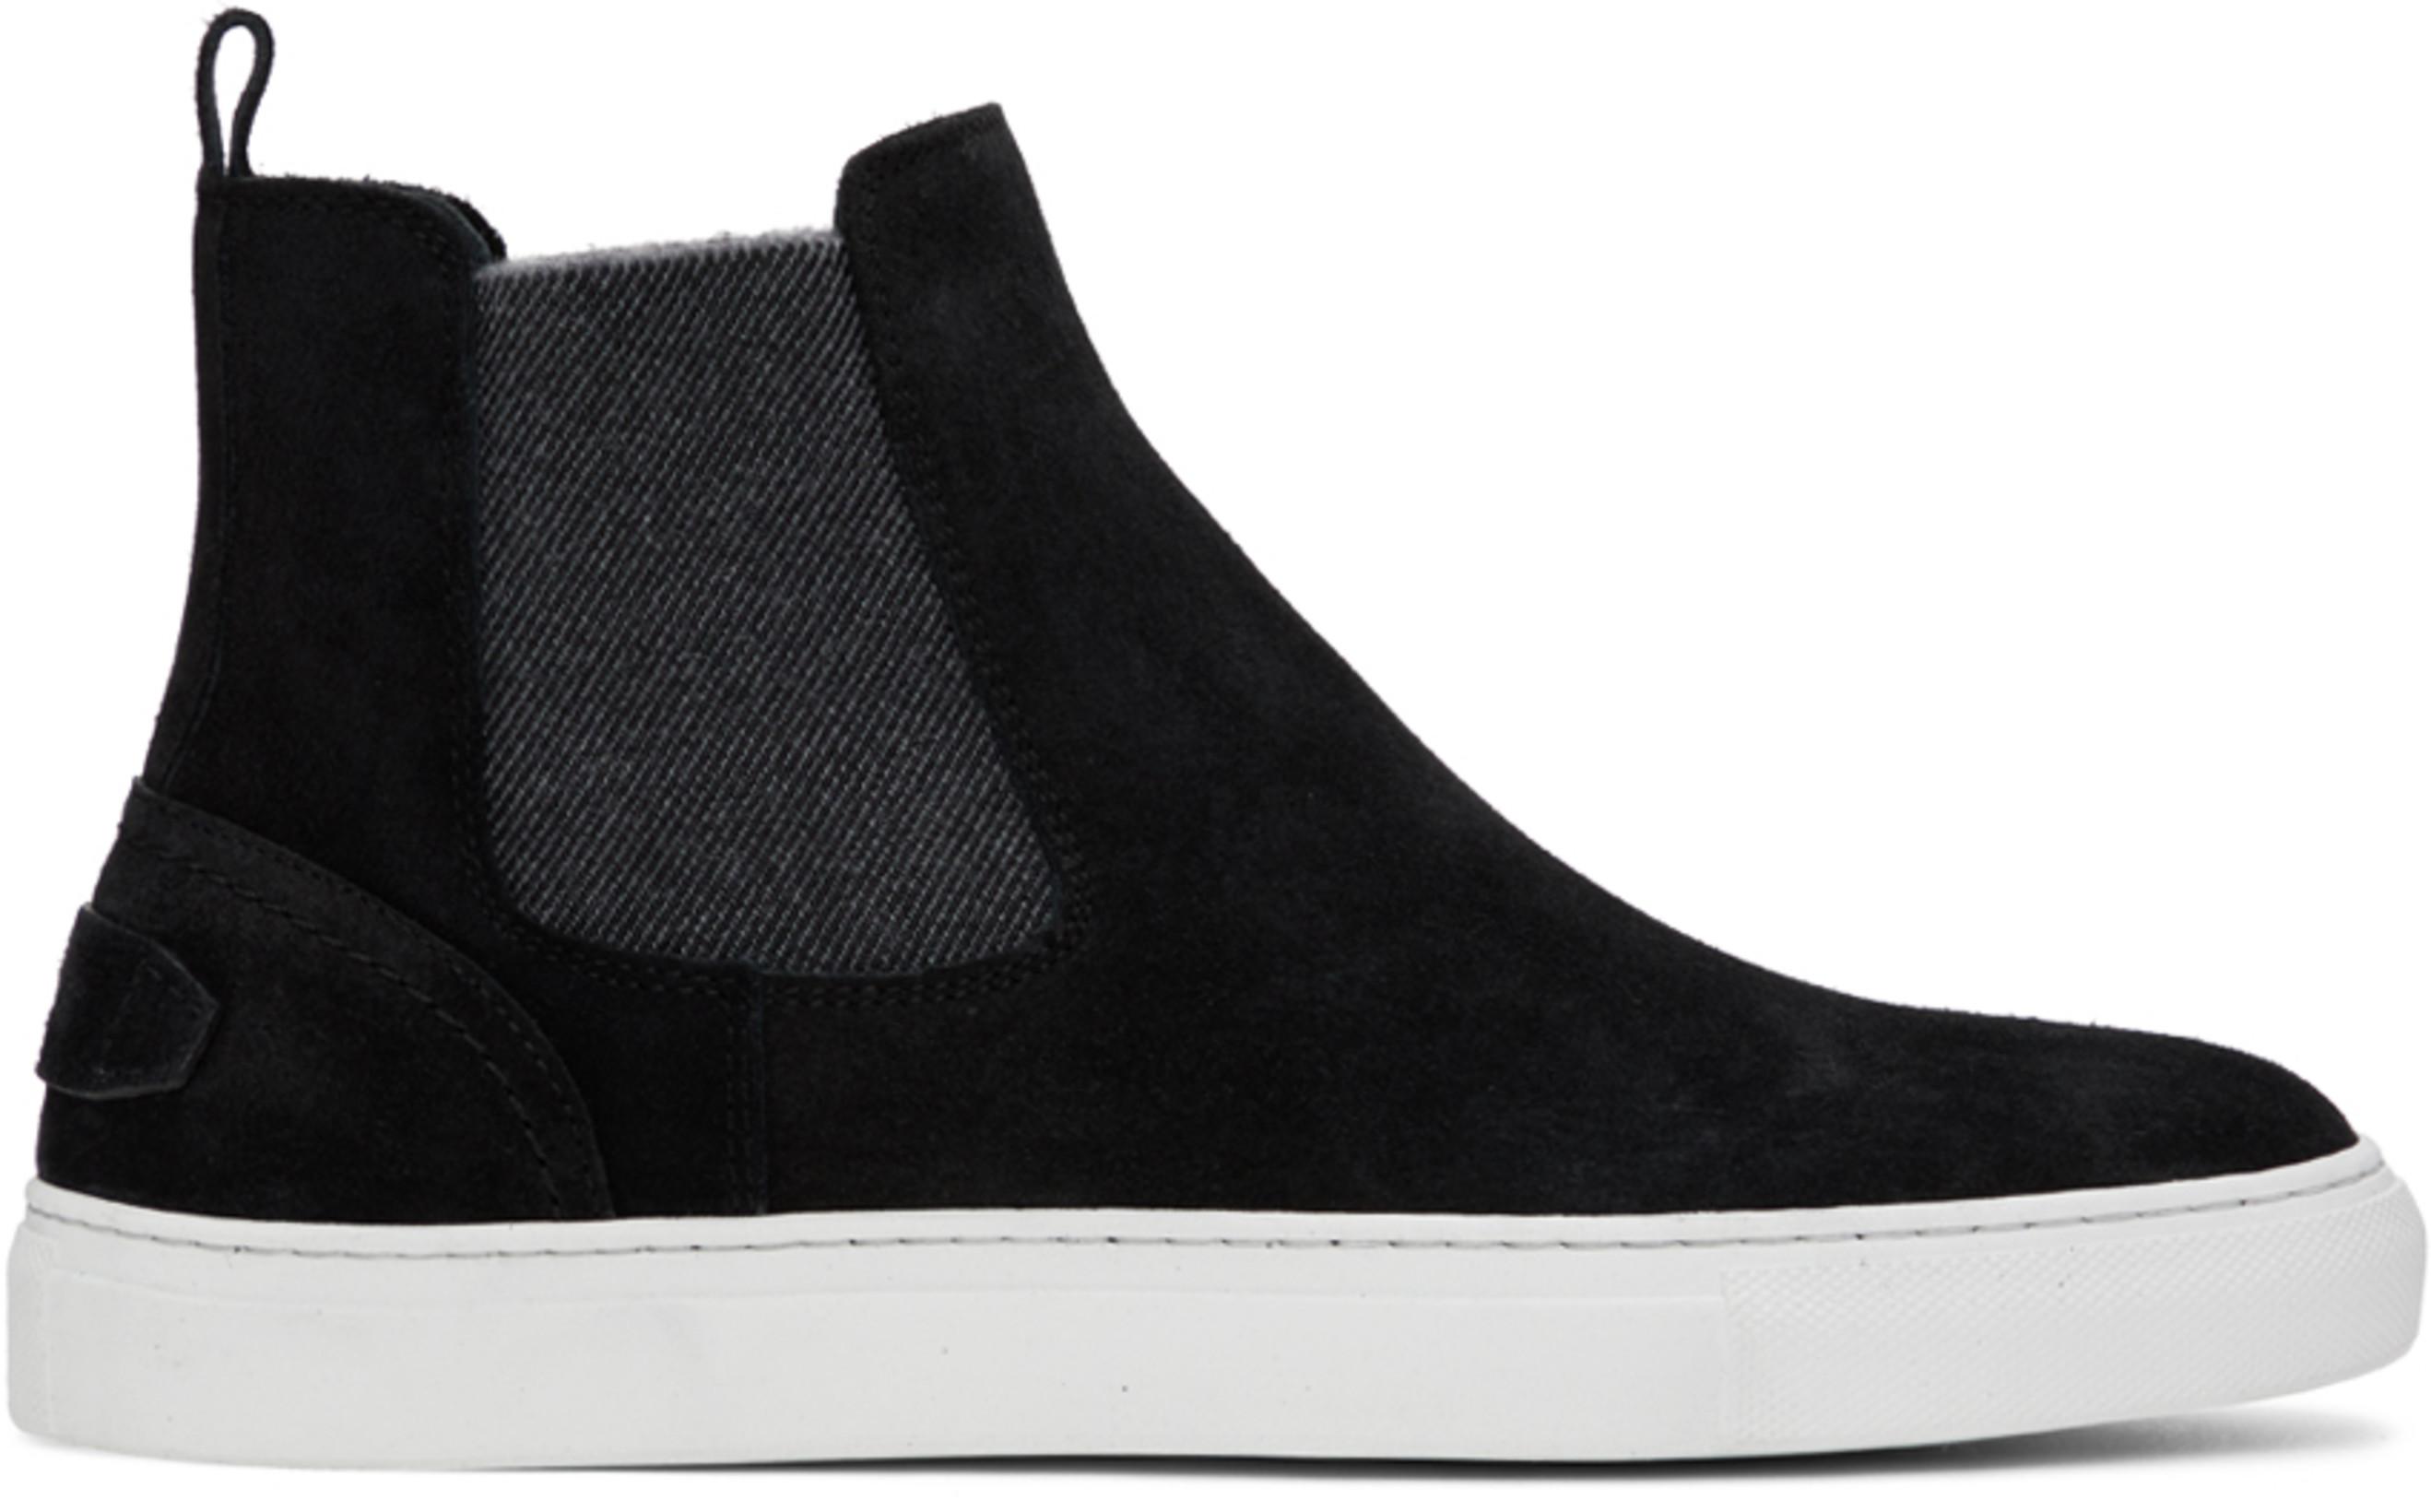 Black Suede Chelsea Boots by BRIONI